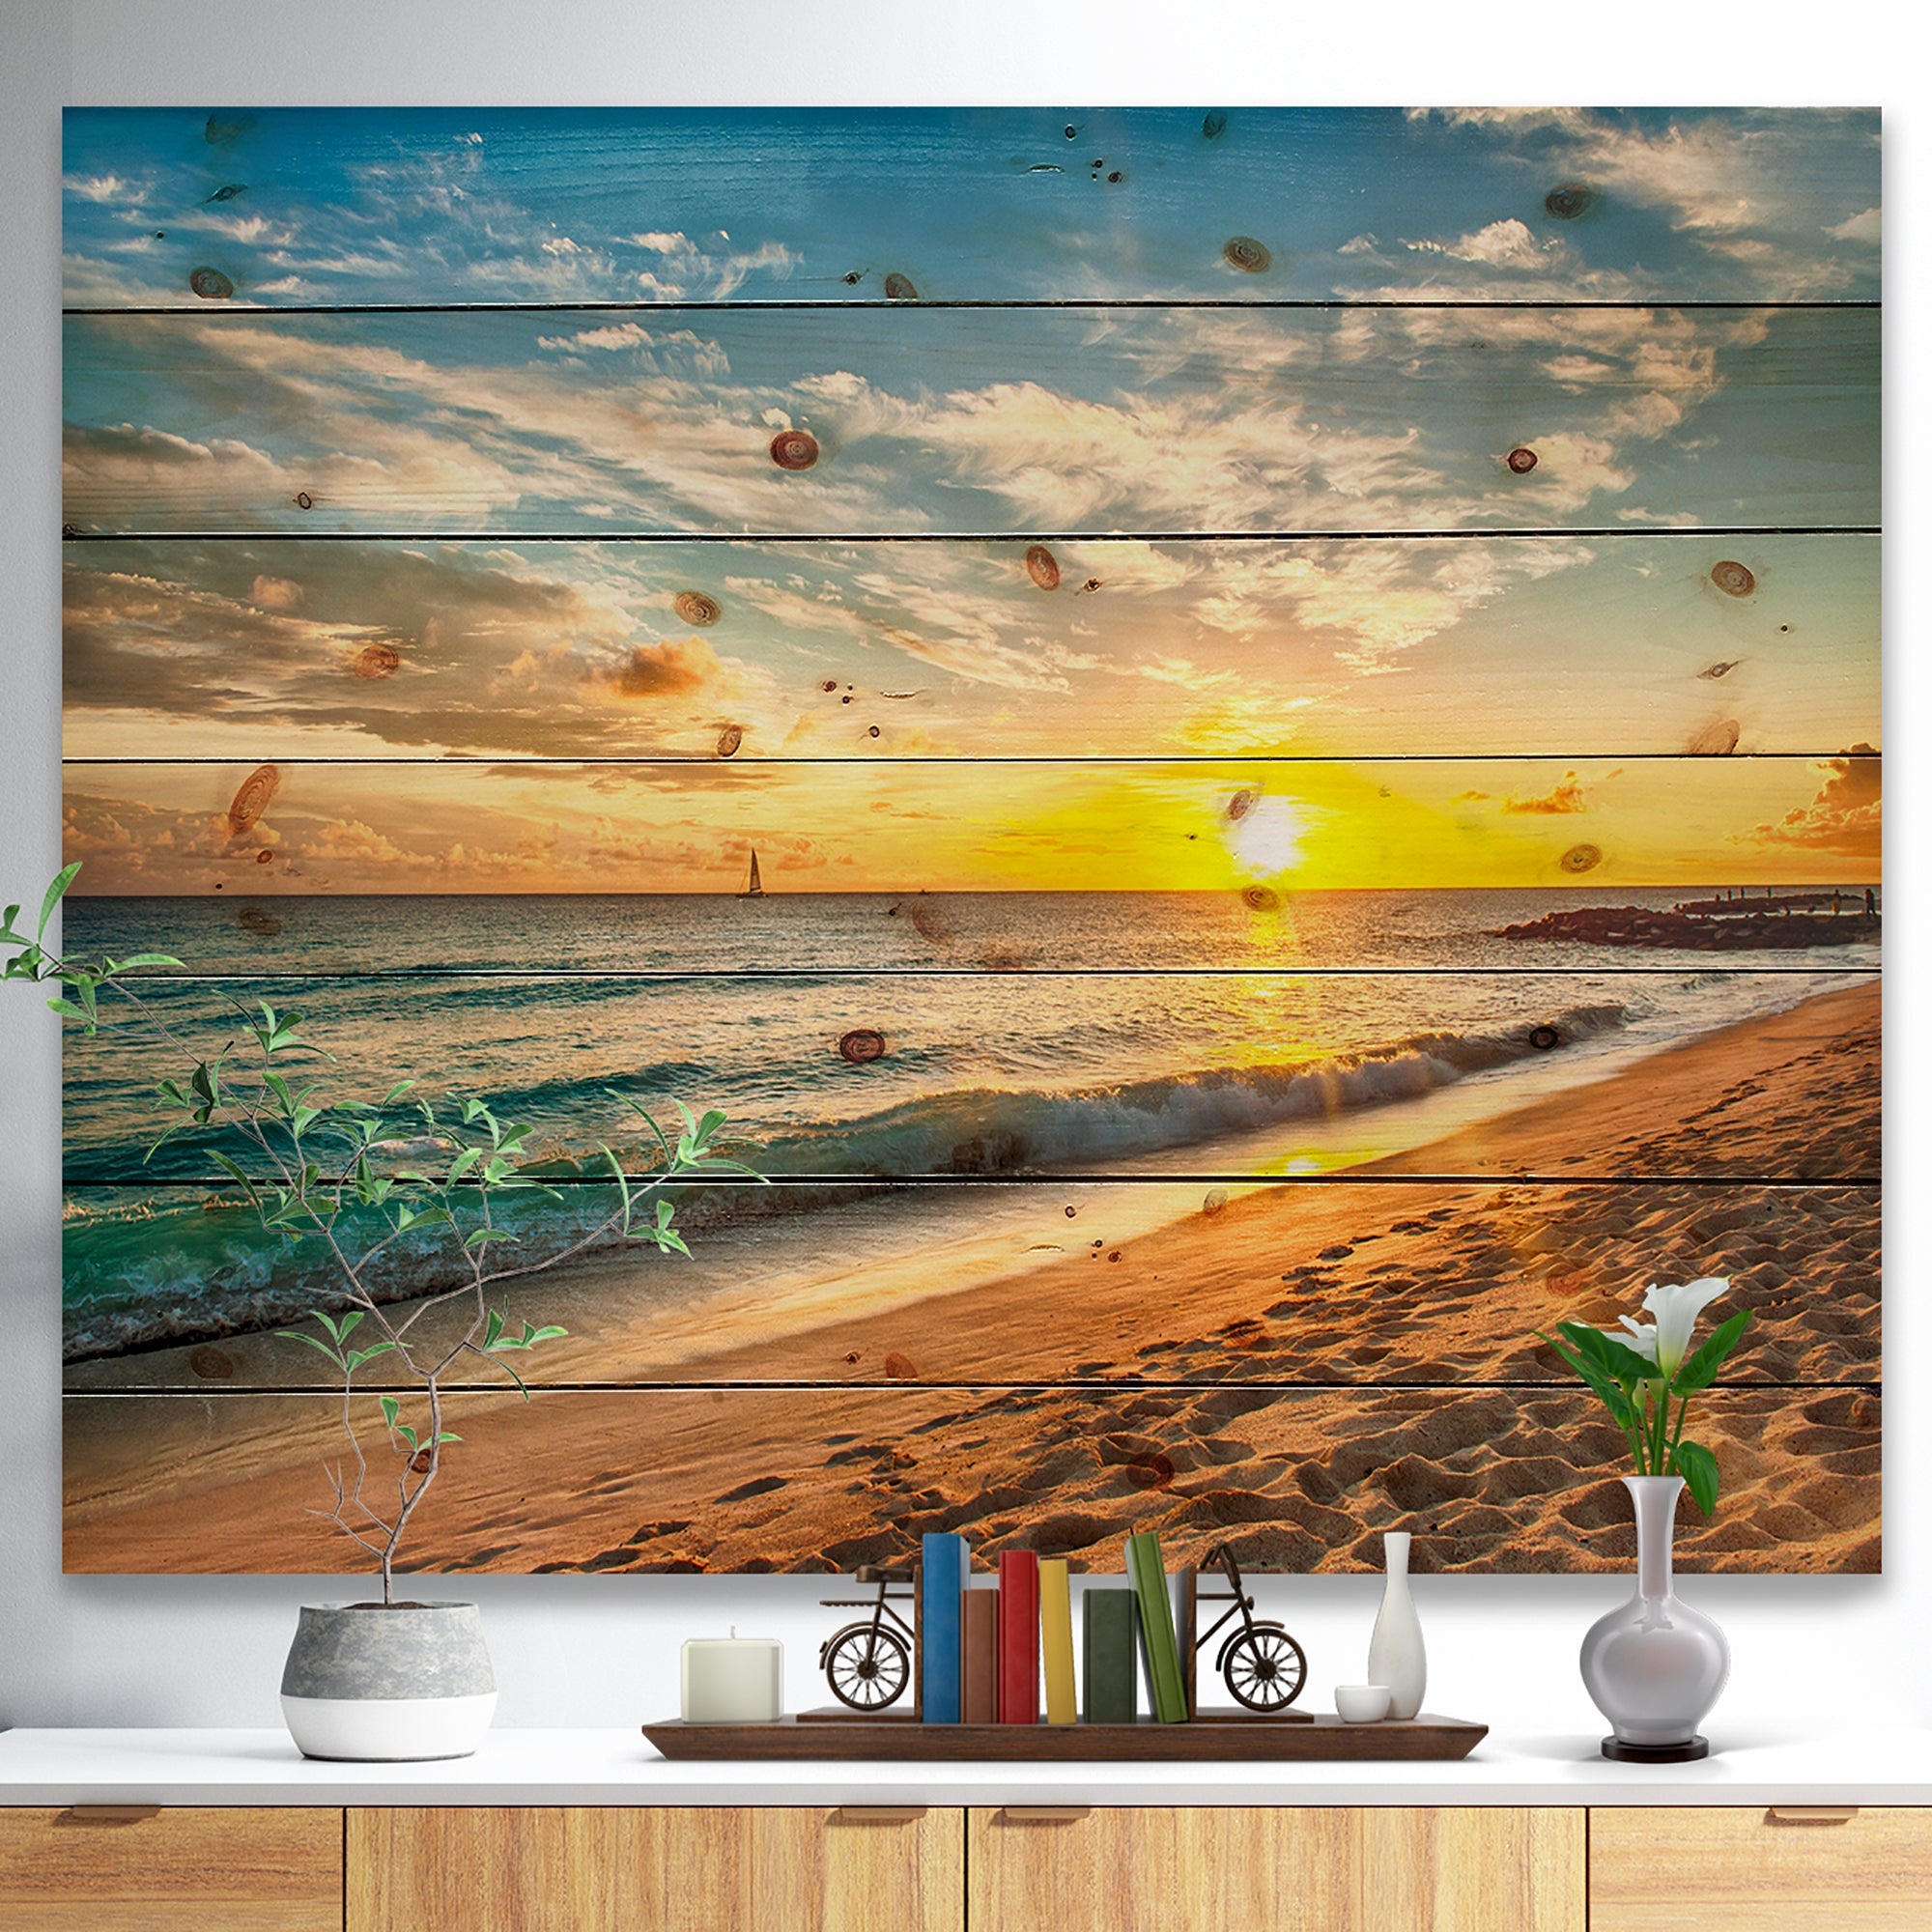 White Beach in Island of Barbados - Modern Seascape Print on Natural Pine Wood - 20x15